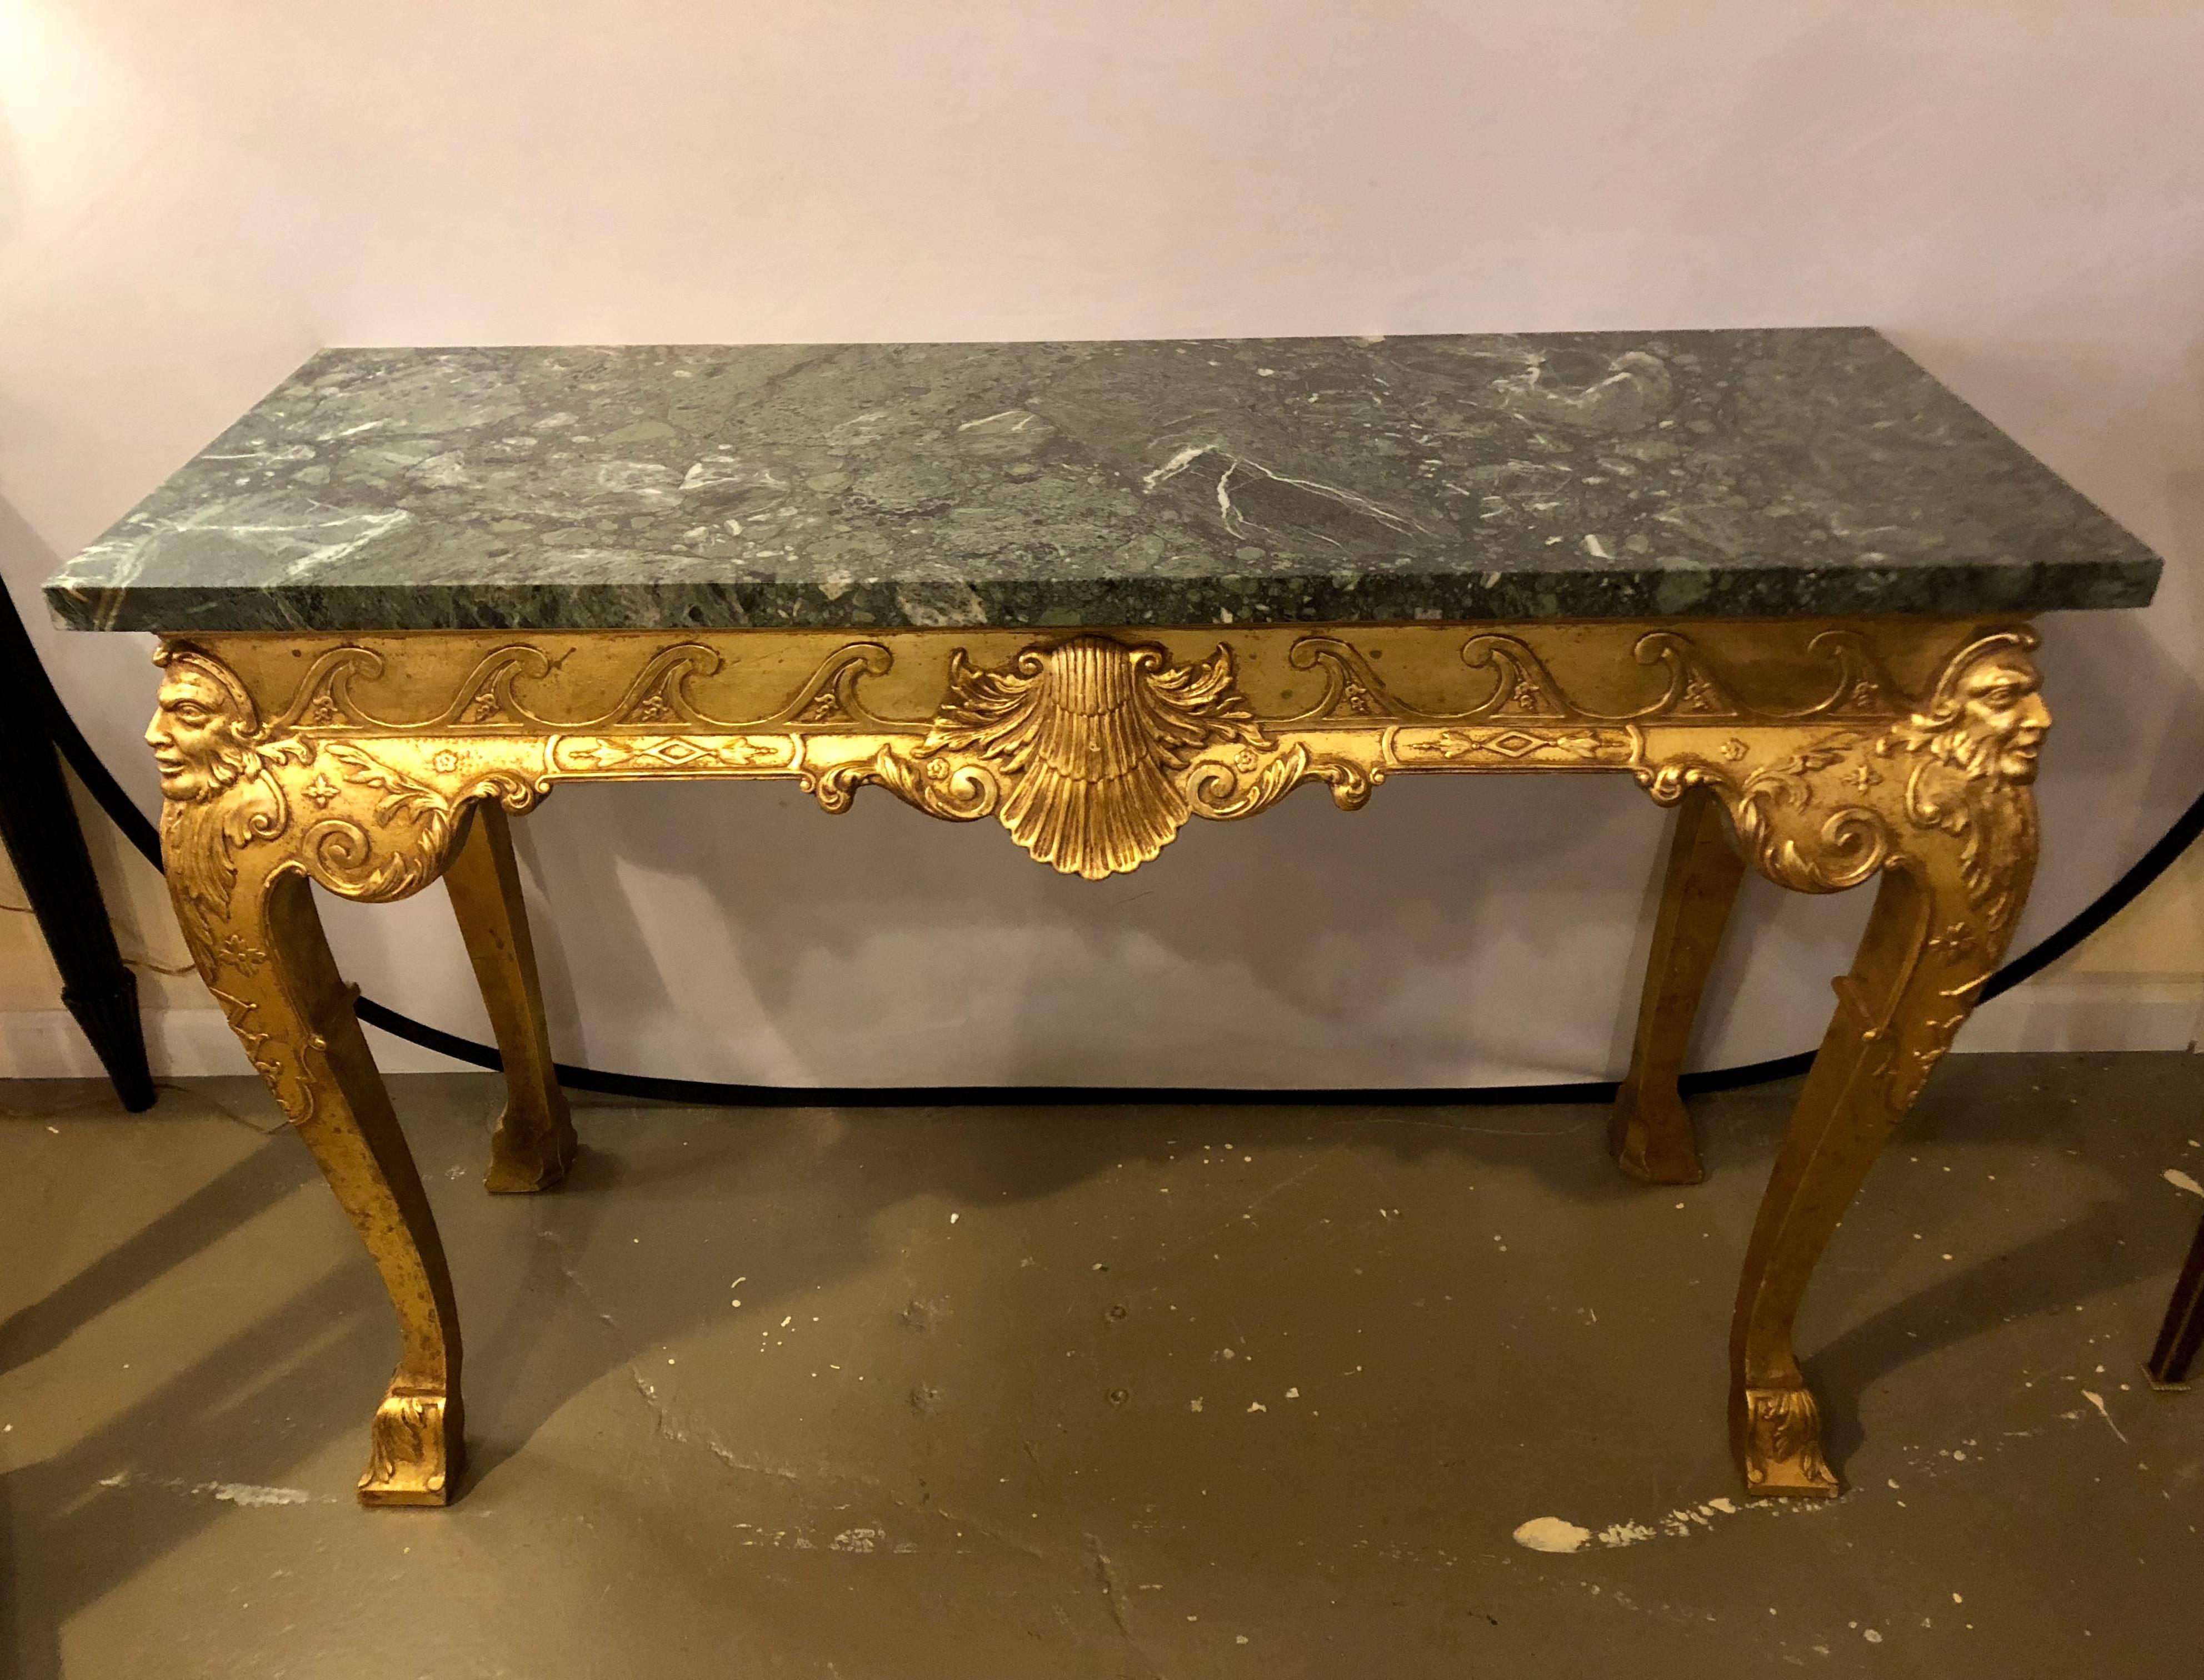 Pair of George II style carved giltwood and marble console tables, late 19th century. Olive green and white-veined marble top. Vitruvian scroll and shell-carved skirt, cabriole legs with masque heads on sides and front supported by Marlborough feet.